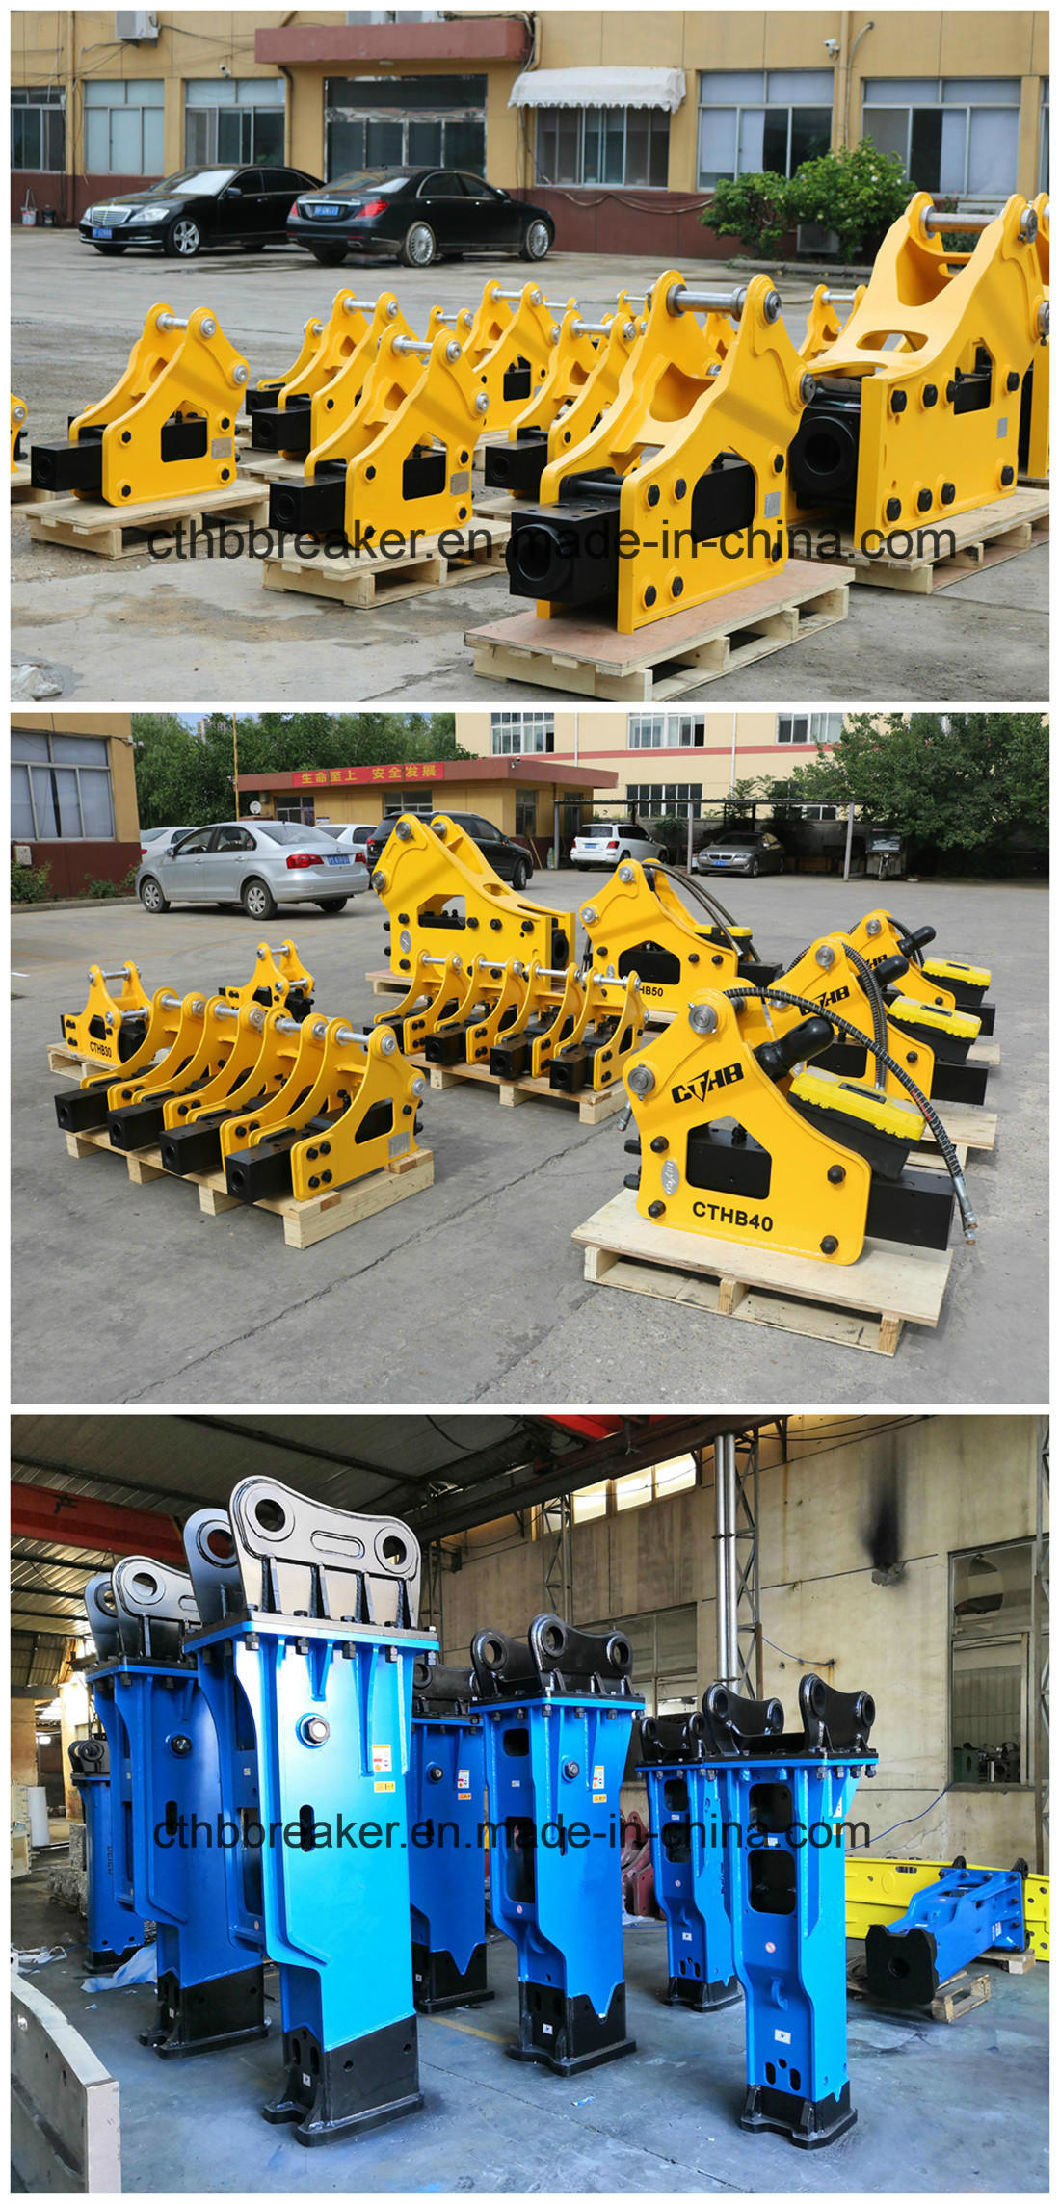 Quality Hydraulic Crusher Hammer in Good Price